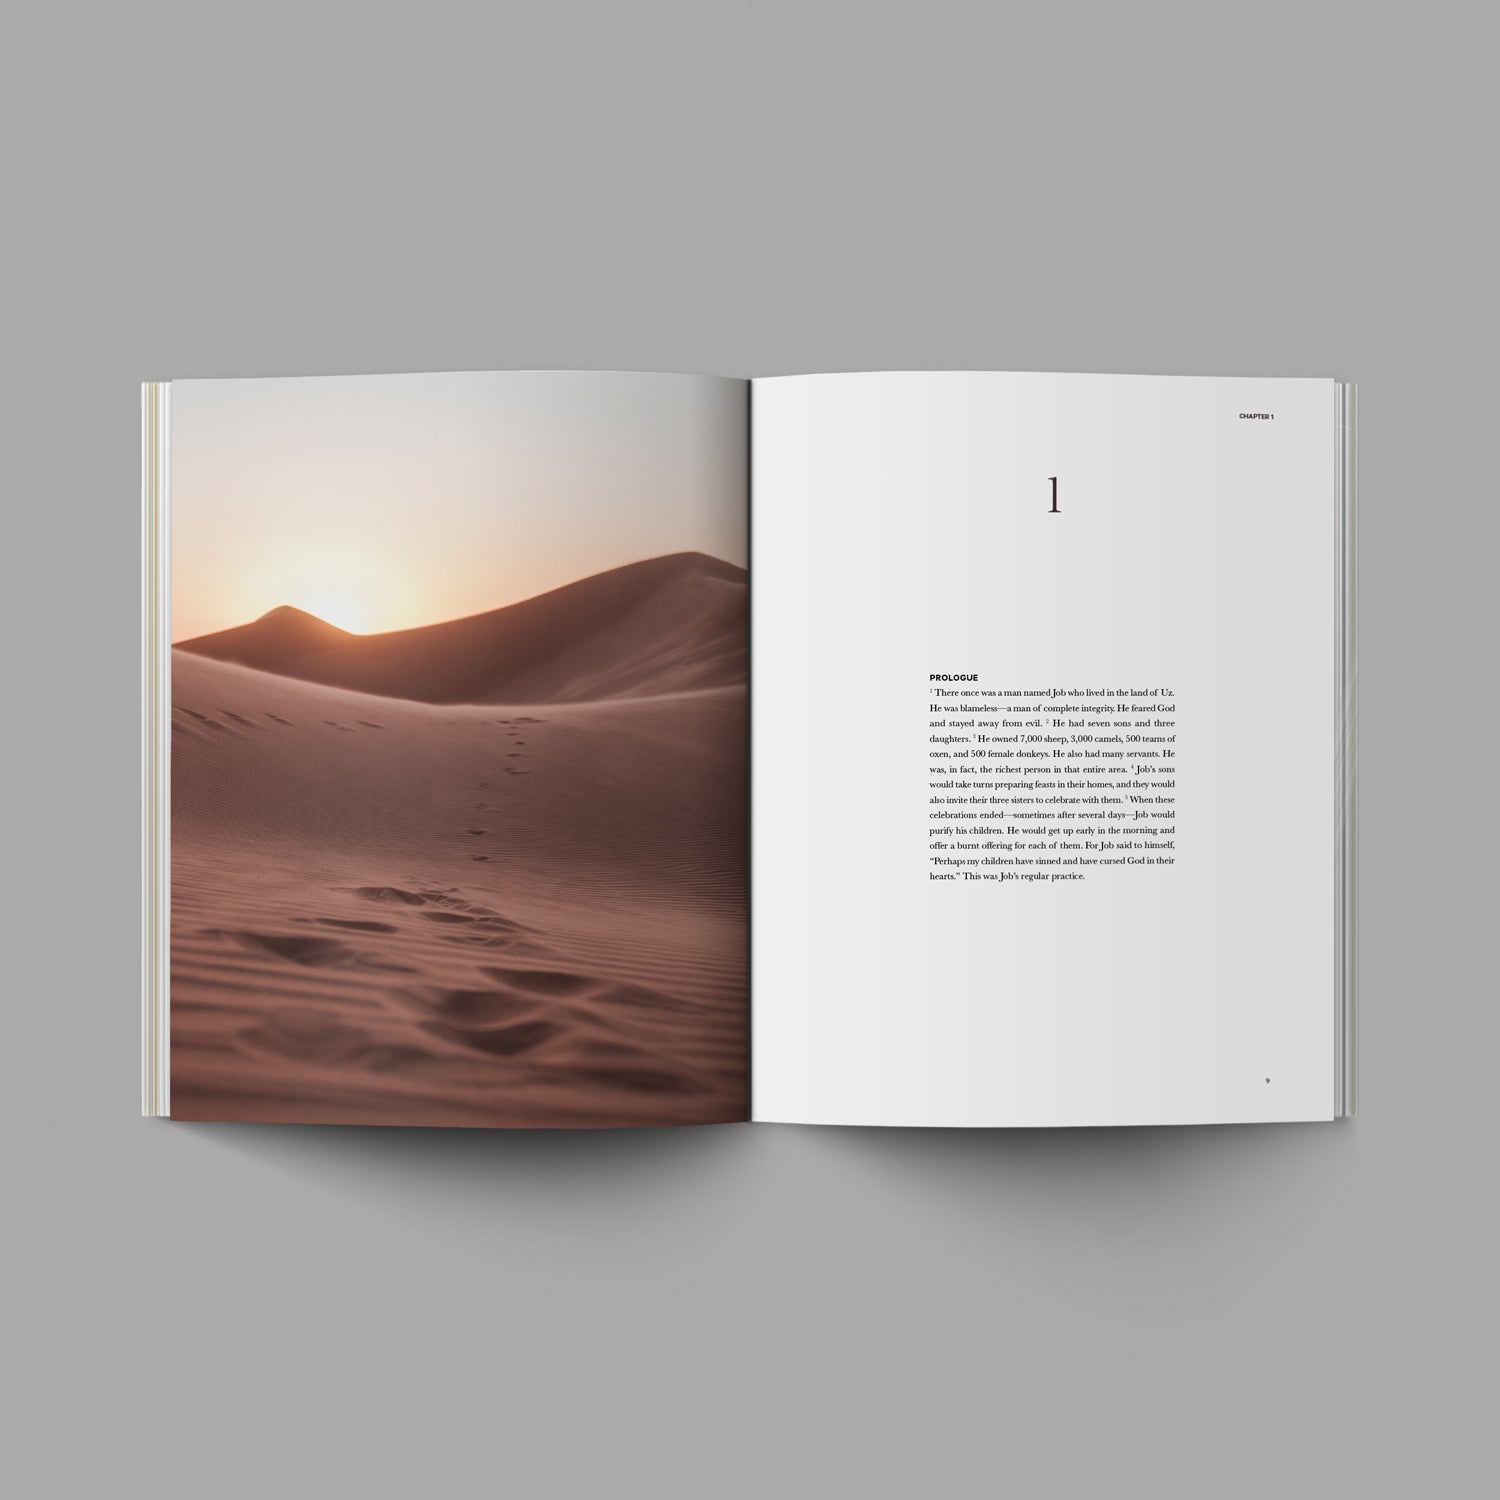 The Book of Job Chapter 1 with desert image